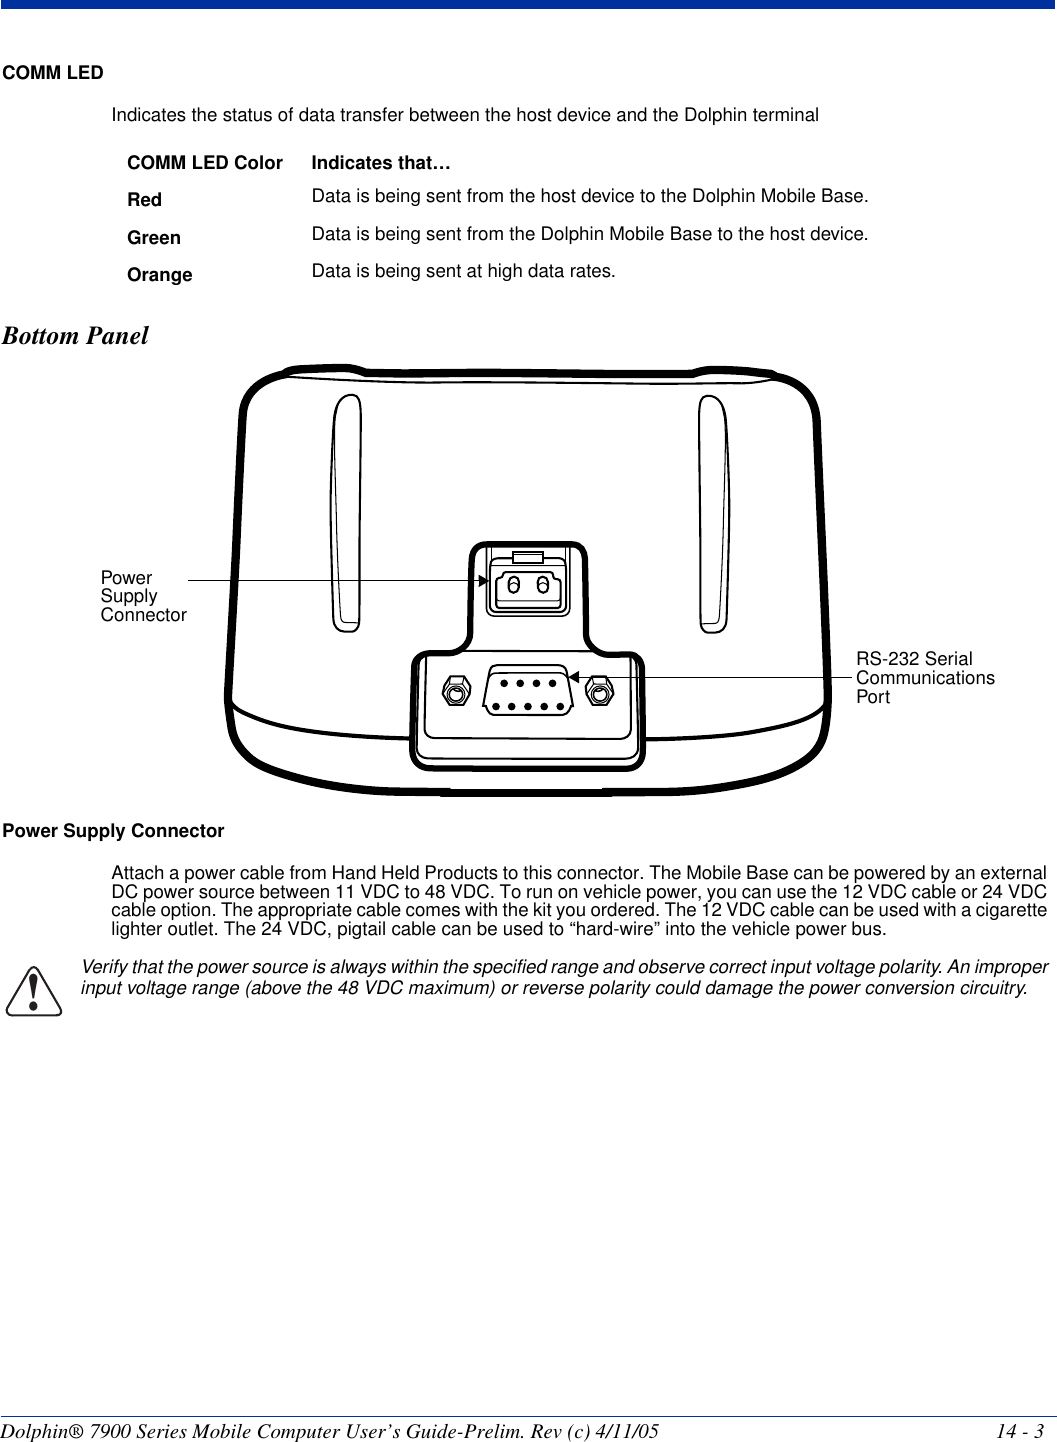 Dolphin® 7900 Series Mobile Computer User’s Guide-Prelim. Rev (c) 4/11/05 14 - 3COMM LED Indicates the status of data transfer between the host device and the Dolphin terminalBottom PanelPower Supply ConnectorAttach a power cable from Hand Held Products to this connector. The Mobile Base can be powered by an external DC power source between 11 VDC to 48 VDC. To run on vehicle power, you can use the 12 VDC cable or 24 VDC cable option. The appropriate cable comes with the kit you ordered. The 12 VDC cable can be used with a cigarette lighter outlet. The 24 VDC, pigtail cable can be used to “hard-wire” into the vehicle power bus.Verify that the power source is always within the specified range and observe correct input voltage polarity. An improper input voltage range (above the 48 VDC maximum) or reverse polarity could damage the power conversion circuitry.COMM LED Color Indicates that…Red  Data is being sent from the host device to the Dolphin Mobile Base.Green  Data is being sent from the Dolphin Mobile Base to the host device.Orange  Data is being sent at high data rates.RS-232 Serial Communications PortPower Supply Connector!